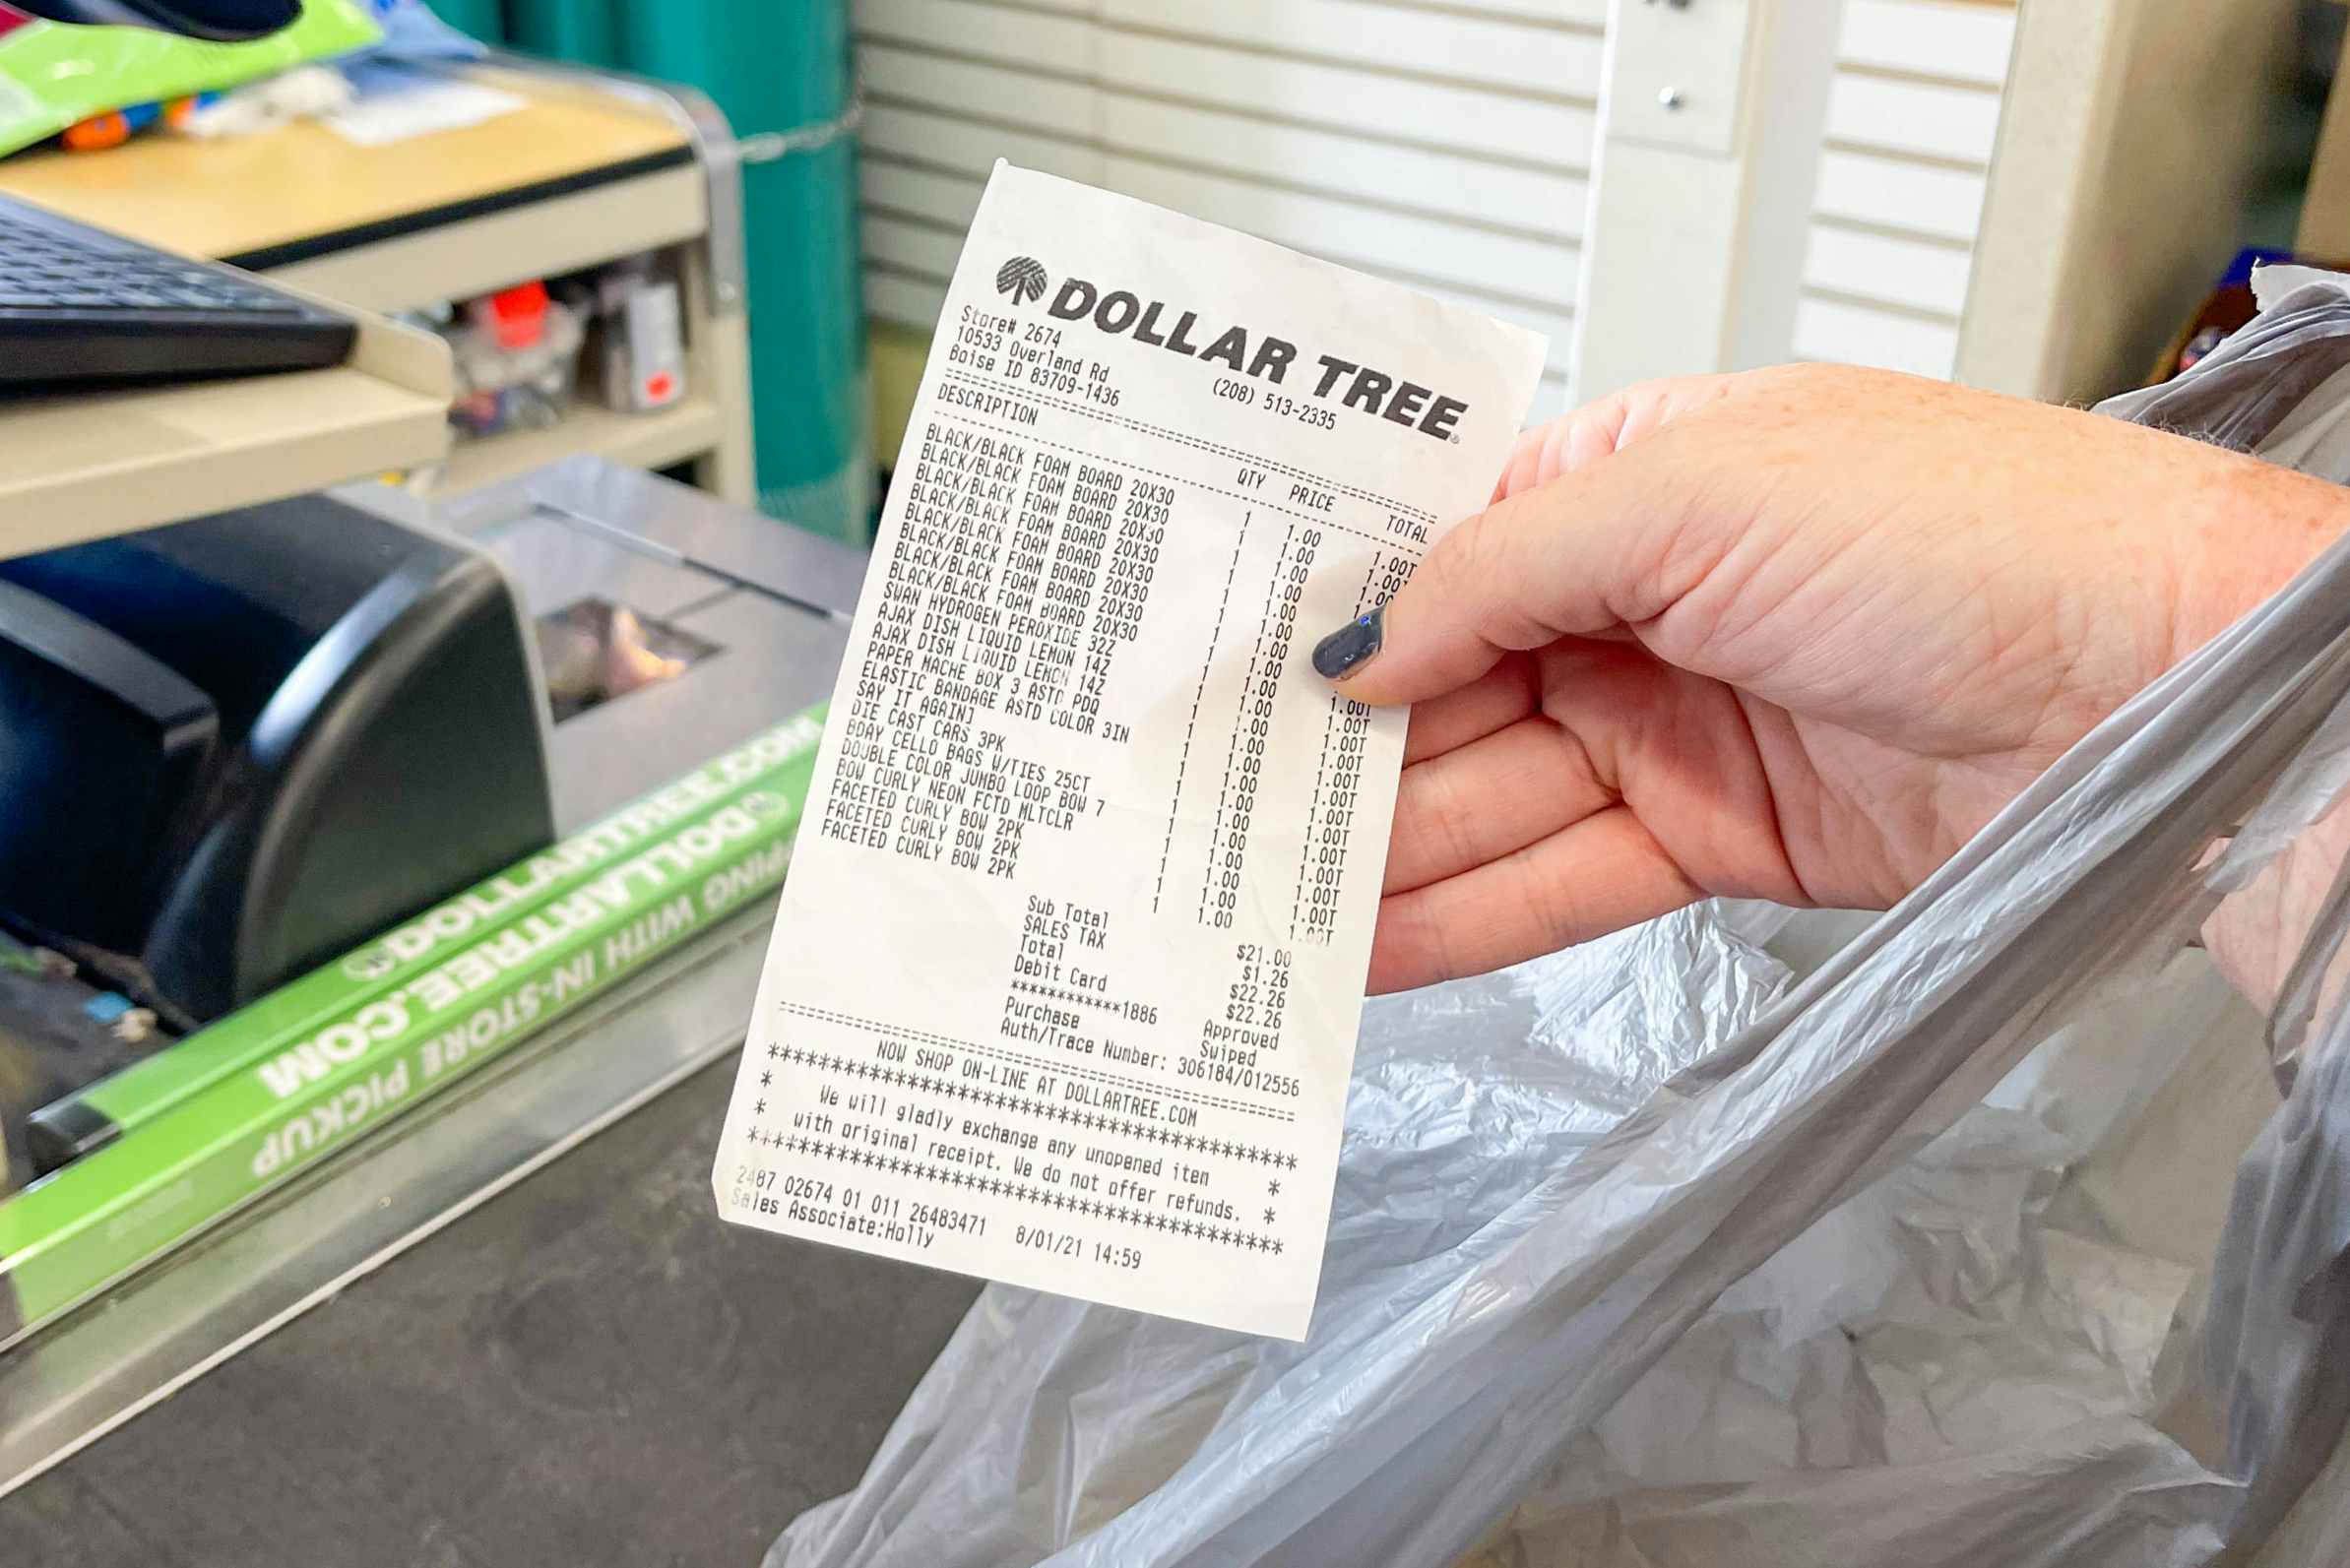 dollar tree receipt at checkout